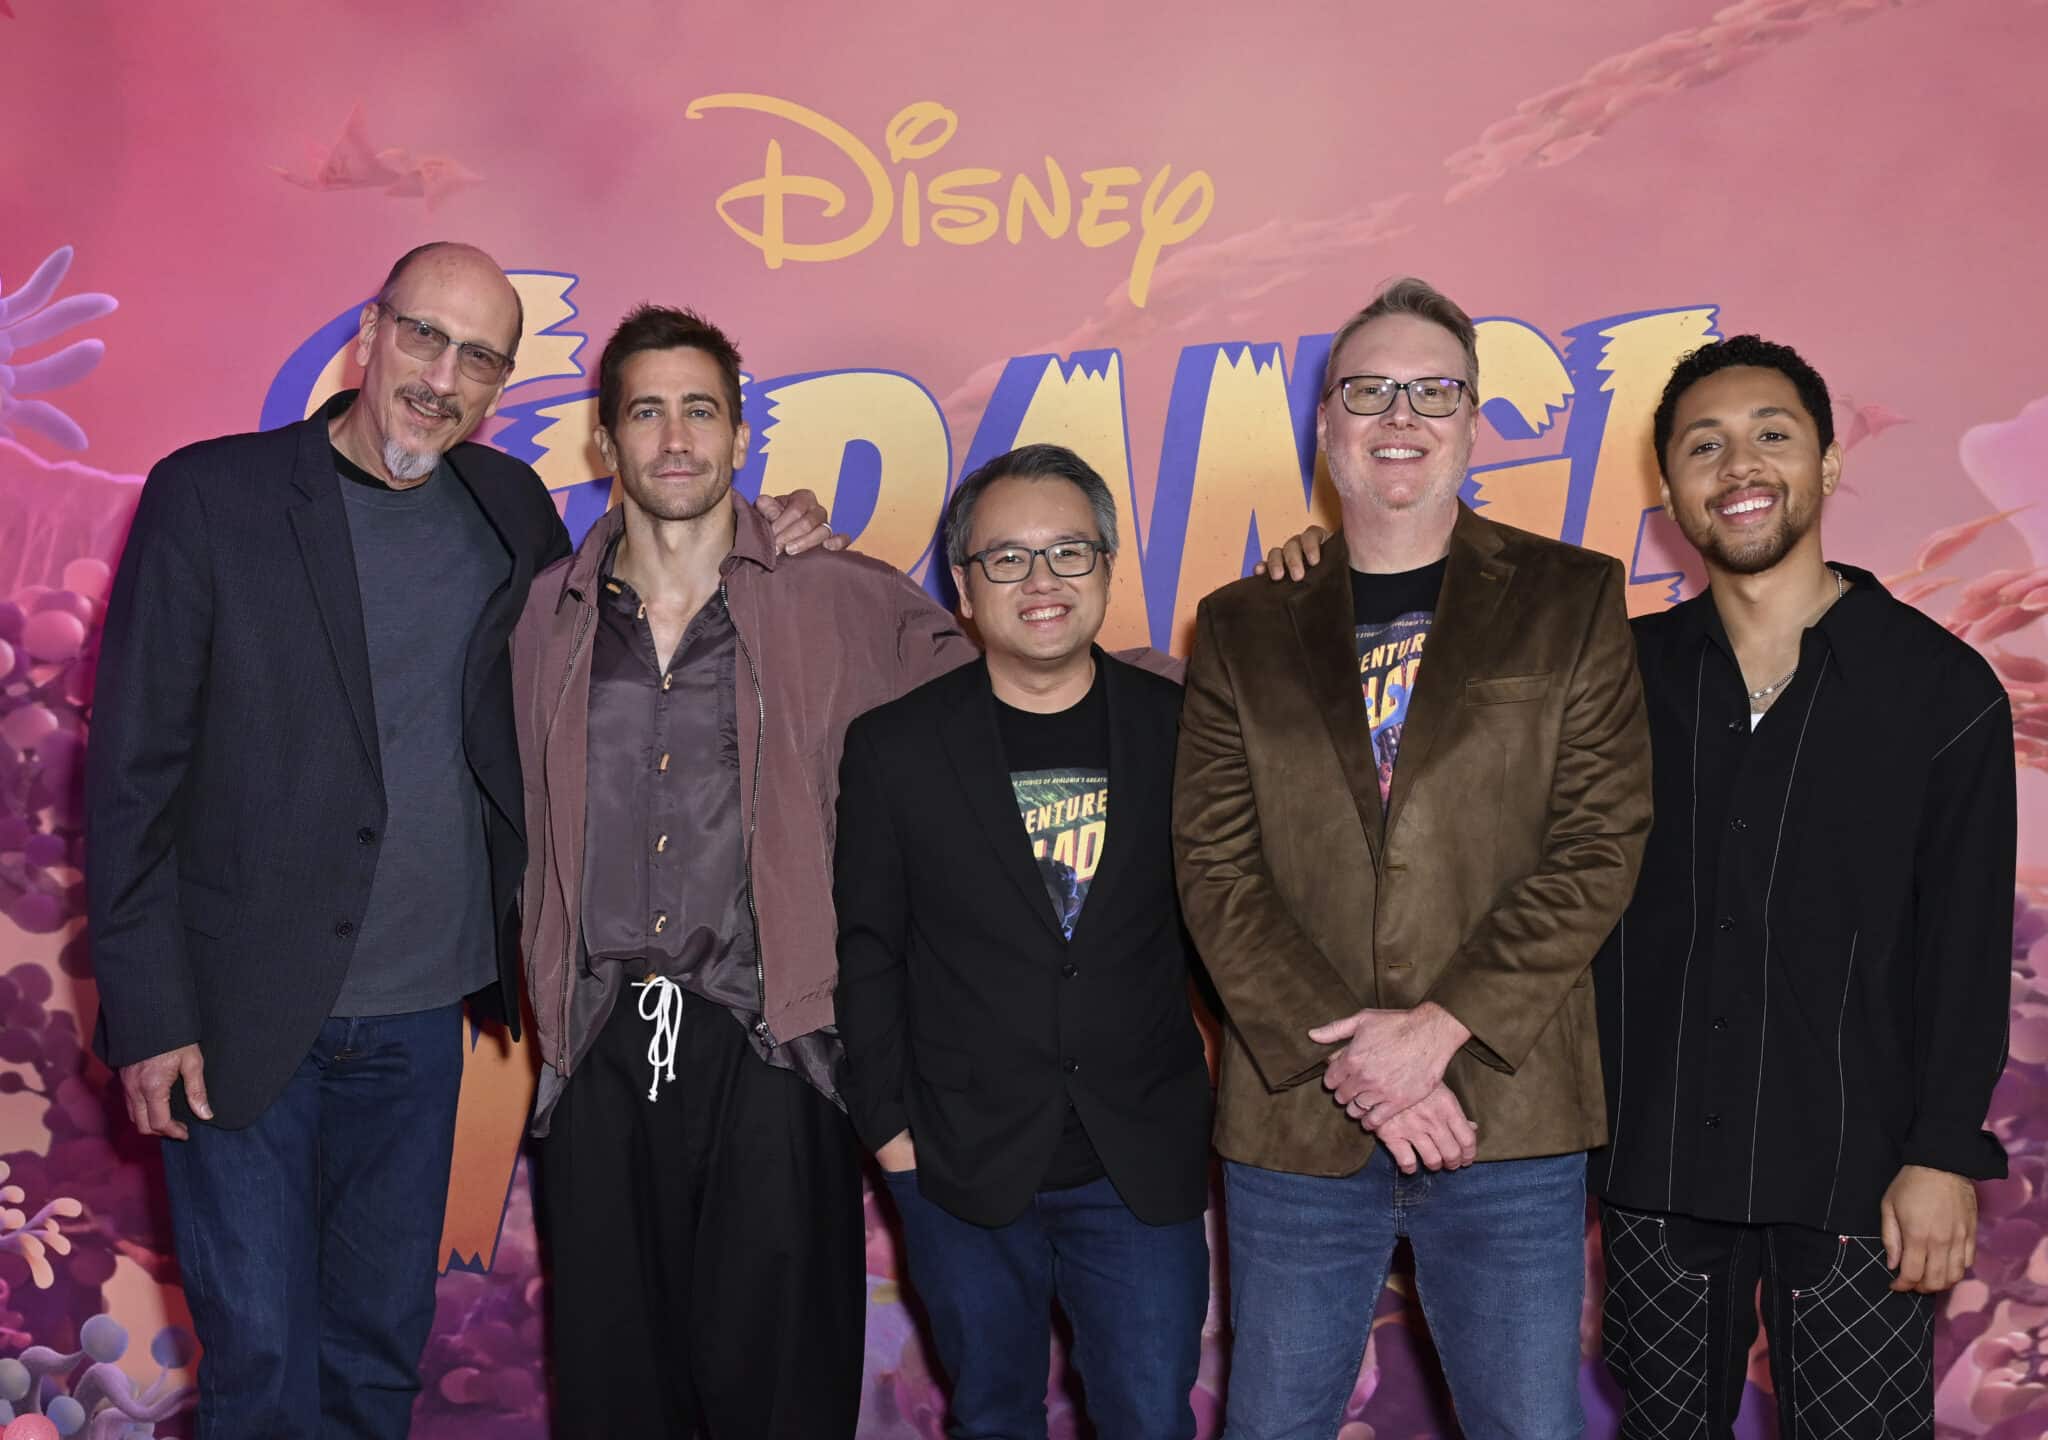 Roy Conli, Jake Gyllenhaal, Qui Nguyen, Don Hall and Jaboukie Young-White standing infront of a pink Strange World backdrop.